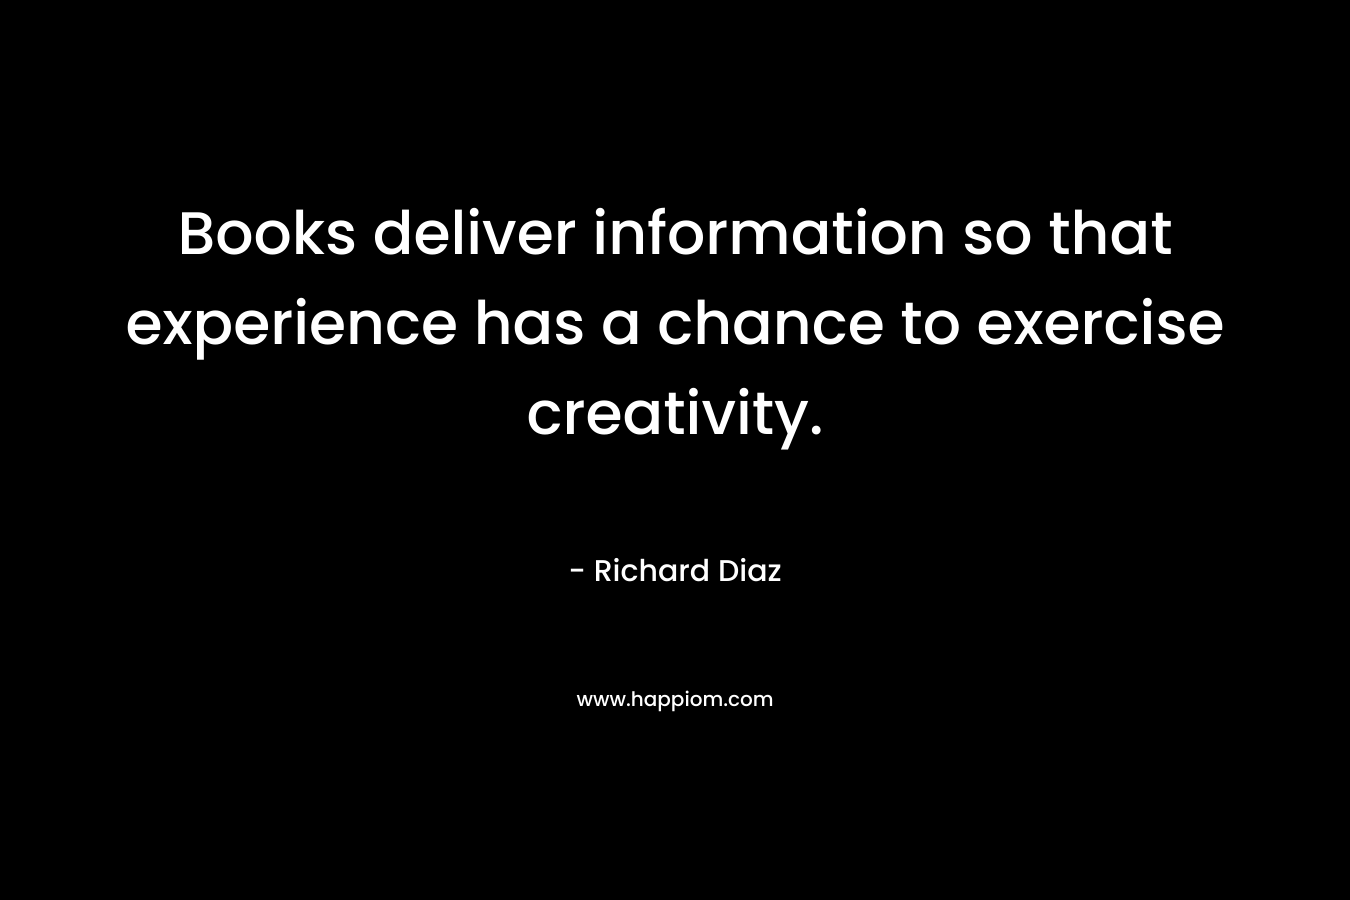 Books deliver information so that experience has a chance to exercise creativity.